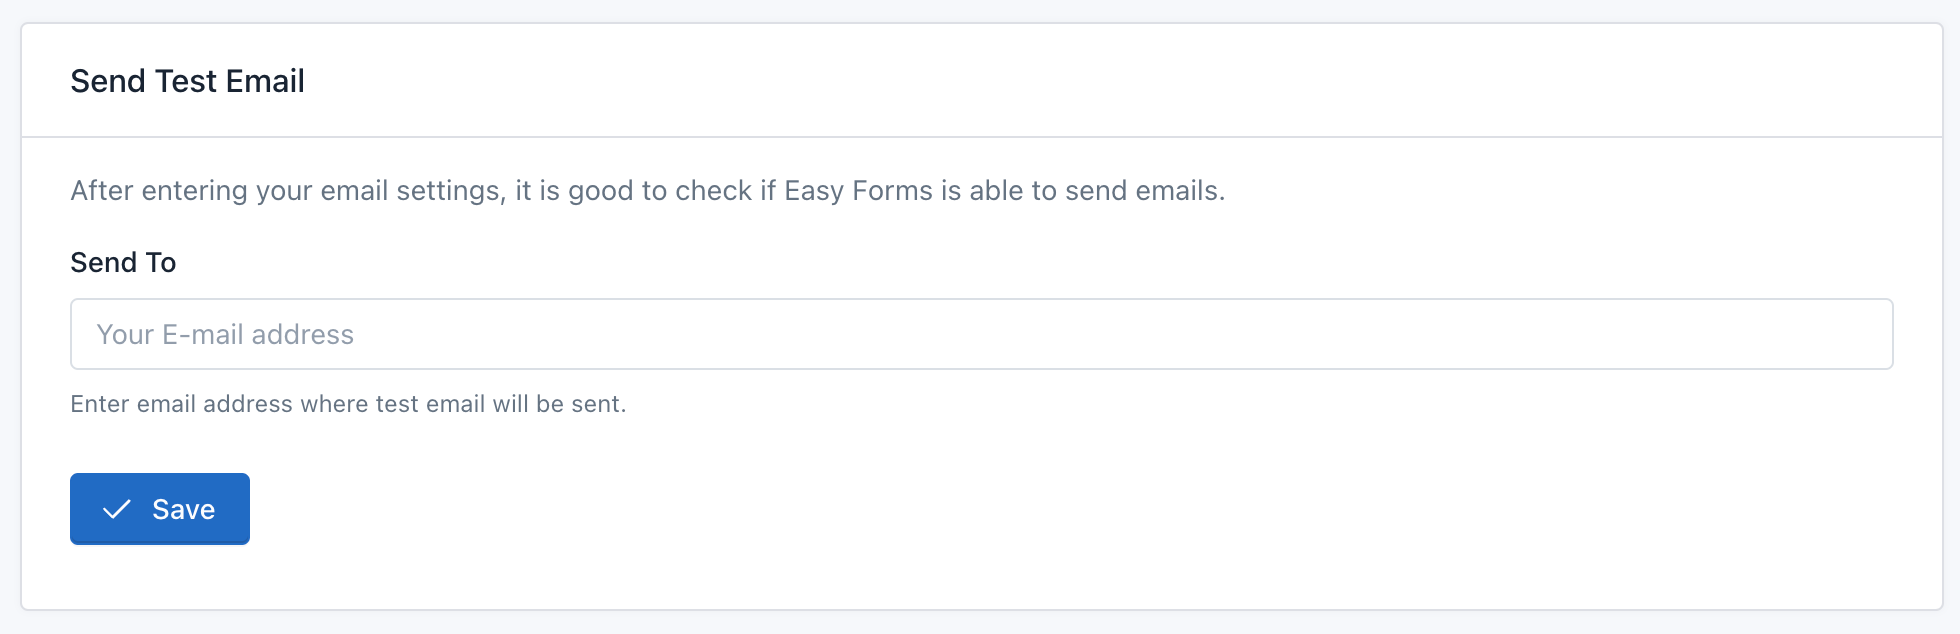 Easy Forms - Email Setup - Send Test Email